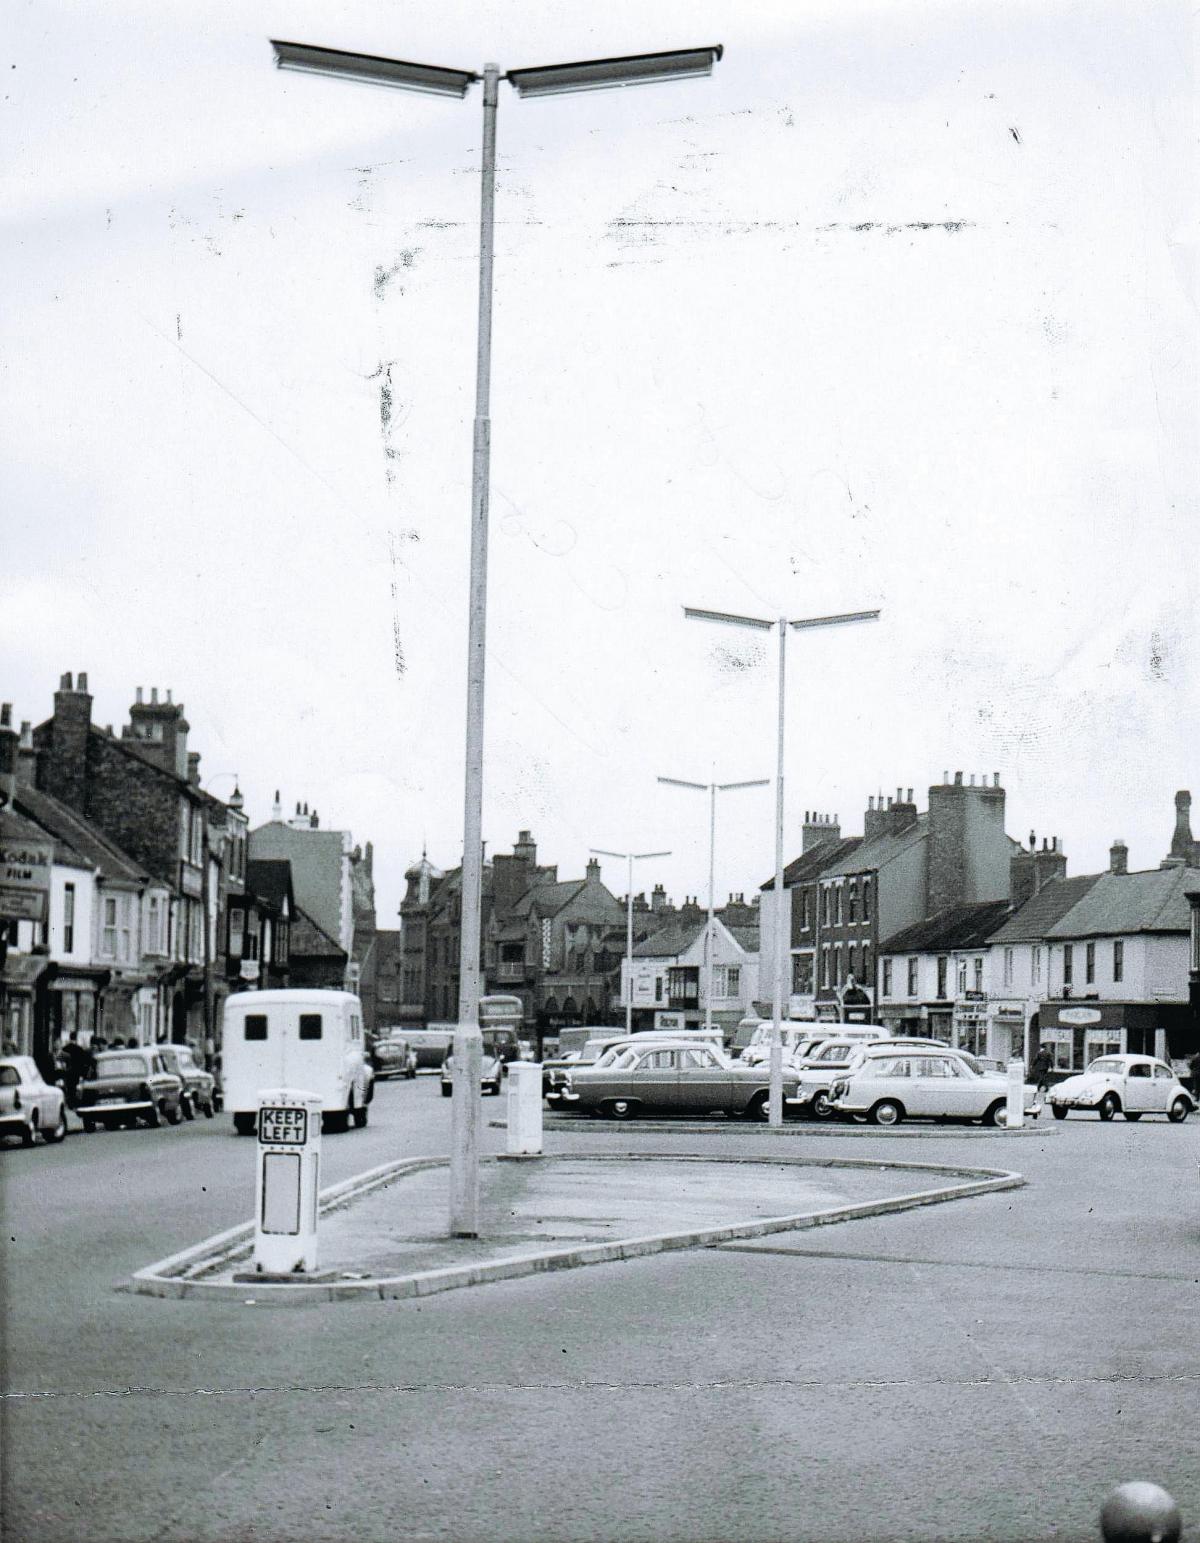 On July 25, 1962, when this picture was taken, it was possible to park in the centre of Bondgate in Darlington. Judging by the words "lamp standards" scrawled on the back of the picture, the photo was taken to illustrate the newly-installed, futuristic li